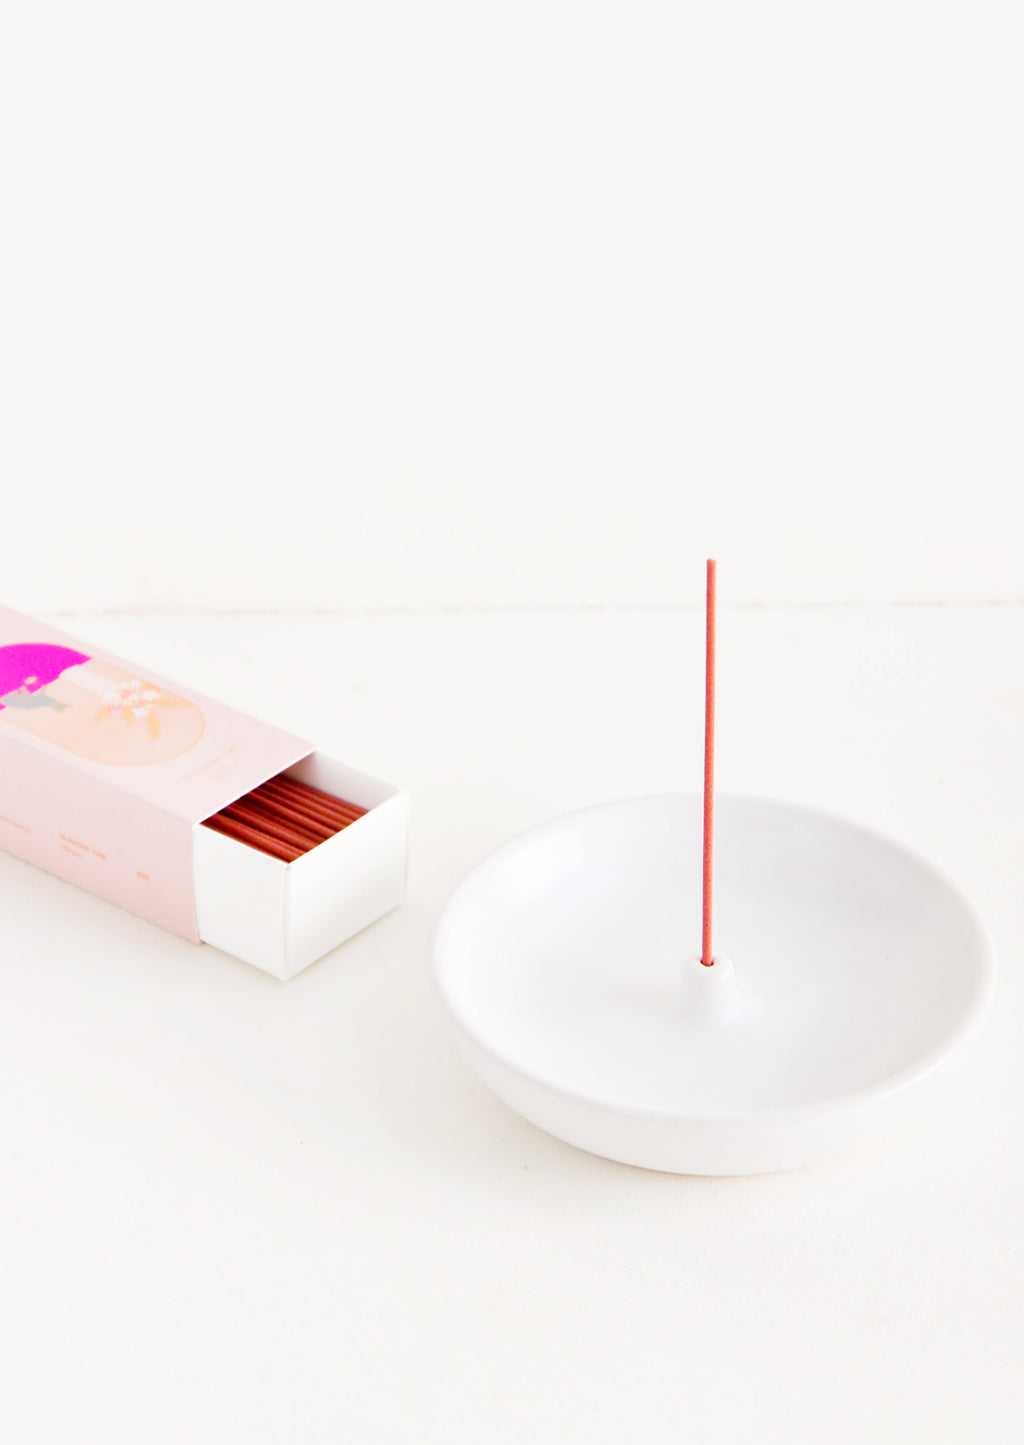 1: A simple white curved ceramic incense holder with a pink stick of incense and a pink box of incense next to it.